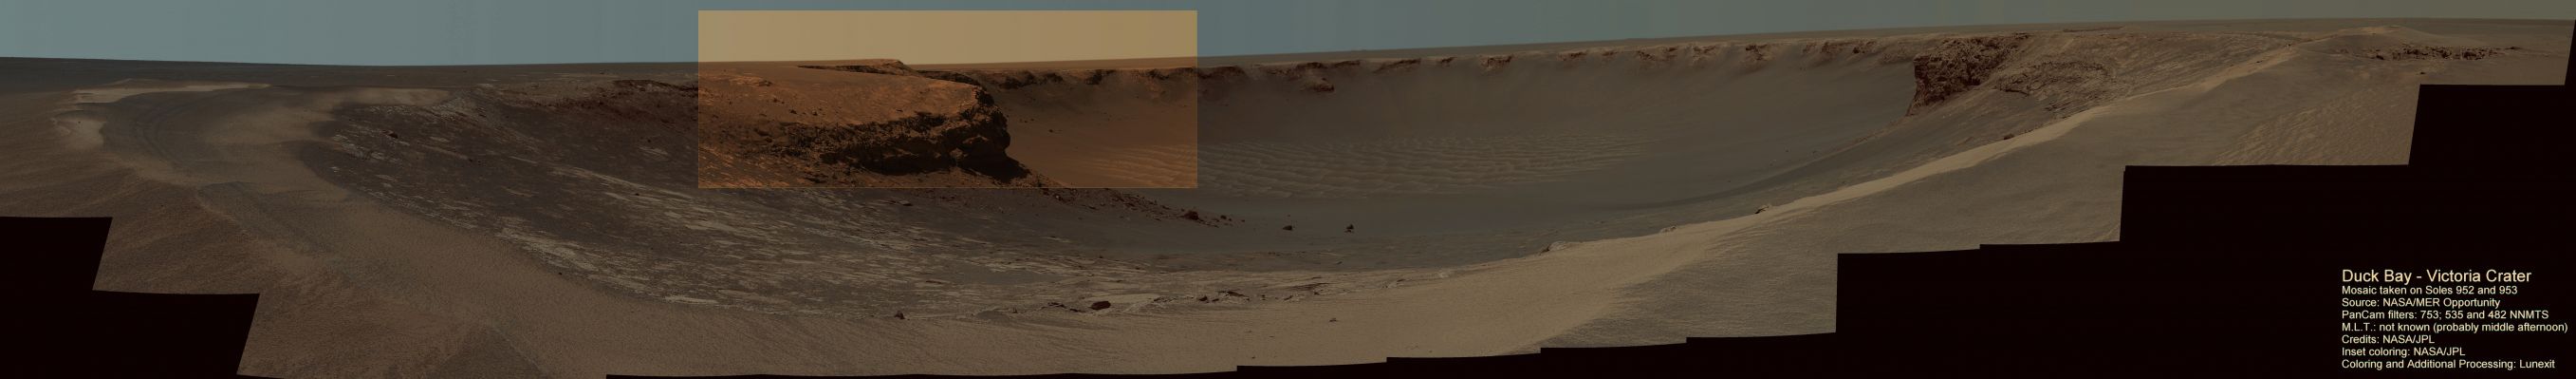 Welcome to Victoria Crater! (possible natural colors; elab. Lunexit - inset: elab. NASA)
Caption NASA:"This image taken by the Panoramic Camera (PanCam) on the Mars Exploration Rover (MER) Opportunity shows the view of Victoria Crater from Duck Bay. Opportunity reached Victoria Crater on Sol 951 (September 27, 2006) after traversing 9,28 Km (5,77 miles) since her Landing Site at Eagle Crater. 
Victoria Crater is roughly 800 mt (about 0,5 mile) wide -- about 5 times wider than Endurance Crater, and 40 times as wide as Eagle Crater. The south face of the 6 mt (20 foot) tall layered Cape Verde promontory can be seen in the left side of the inner crater wall, about 50 mt (approx. 165 feet) away from the Rover at the time of the imaging. The north face of the 15 mt (50 foot) tall stack of layered rocks called Cabo Frio can be seen on the right side of the Inner Crater Wall. 
This mosaic was taken on Soles 952 and 953 (September 28 and 29, 2006). 
There are 30 separate pointings through 6 different filters at each pointing. 
This mosaic was generated from Pancam's 753, 535 and 482 nnmts filters".
Parole chiave: Victoria Crater